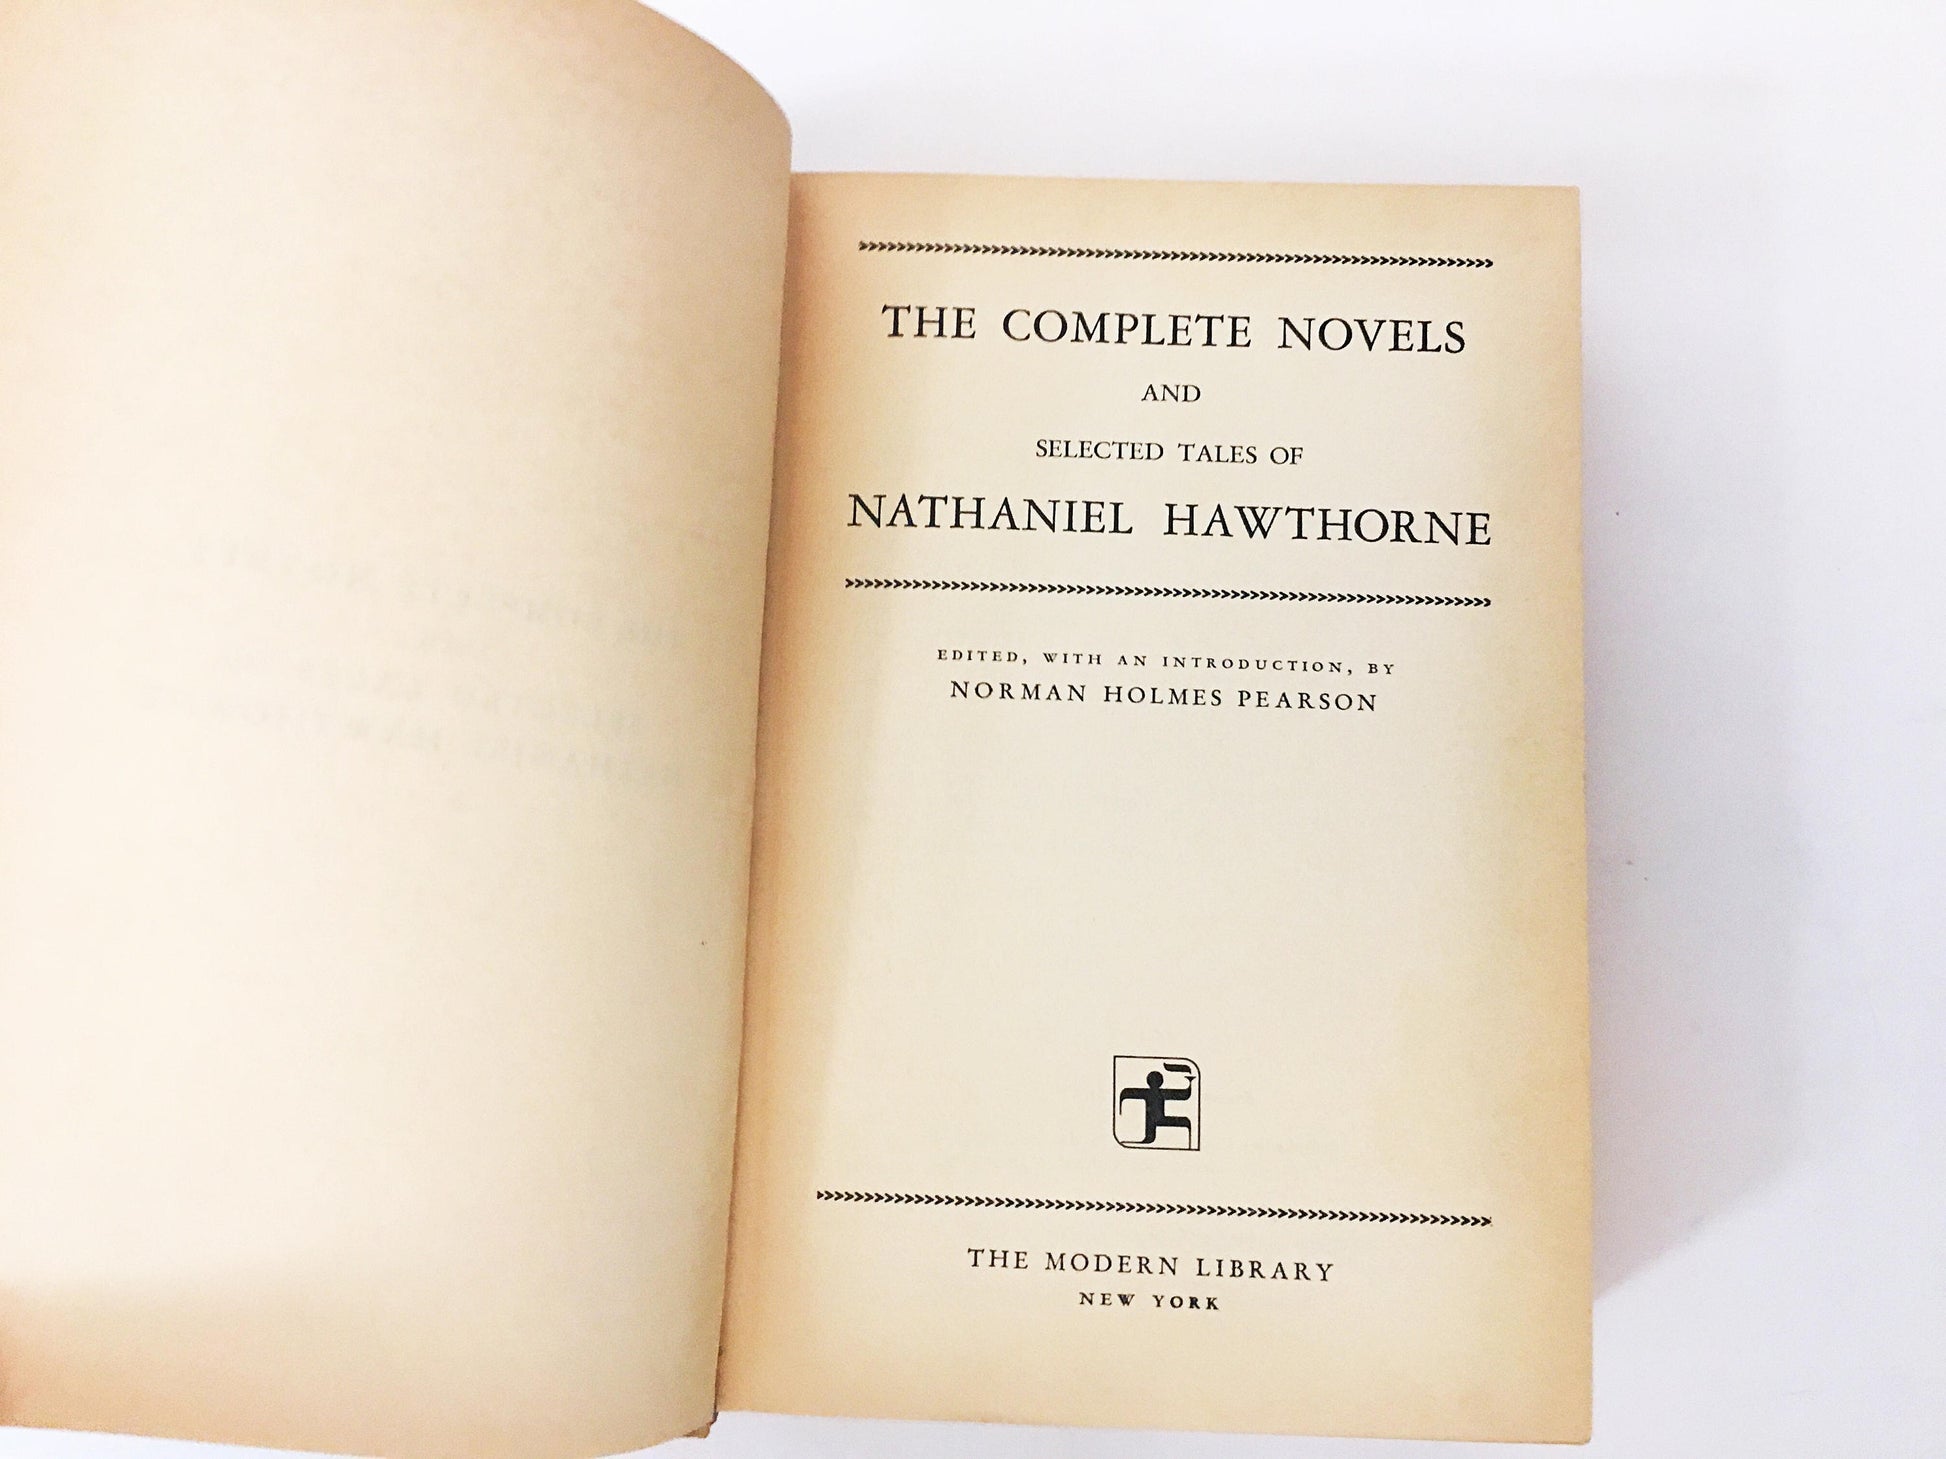 Nathaniel Hawthorne Complete Novels and Selected Tales. Yellow bookshelf home decor Modern Library vitnage book circa 1965.